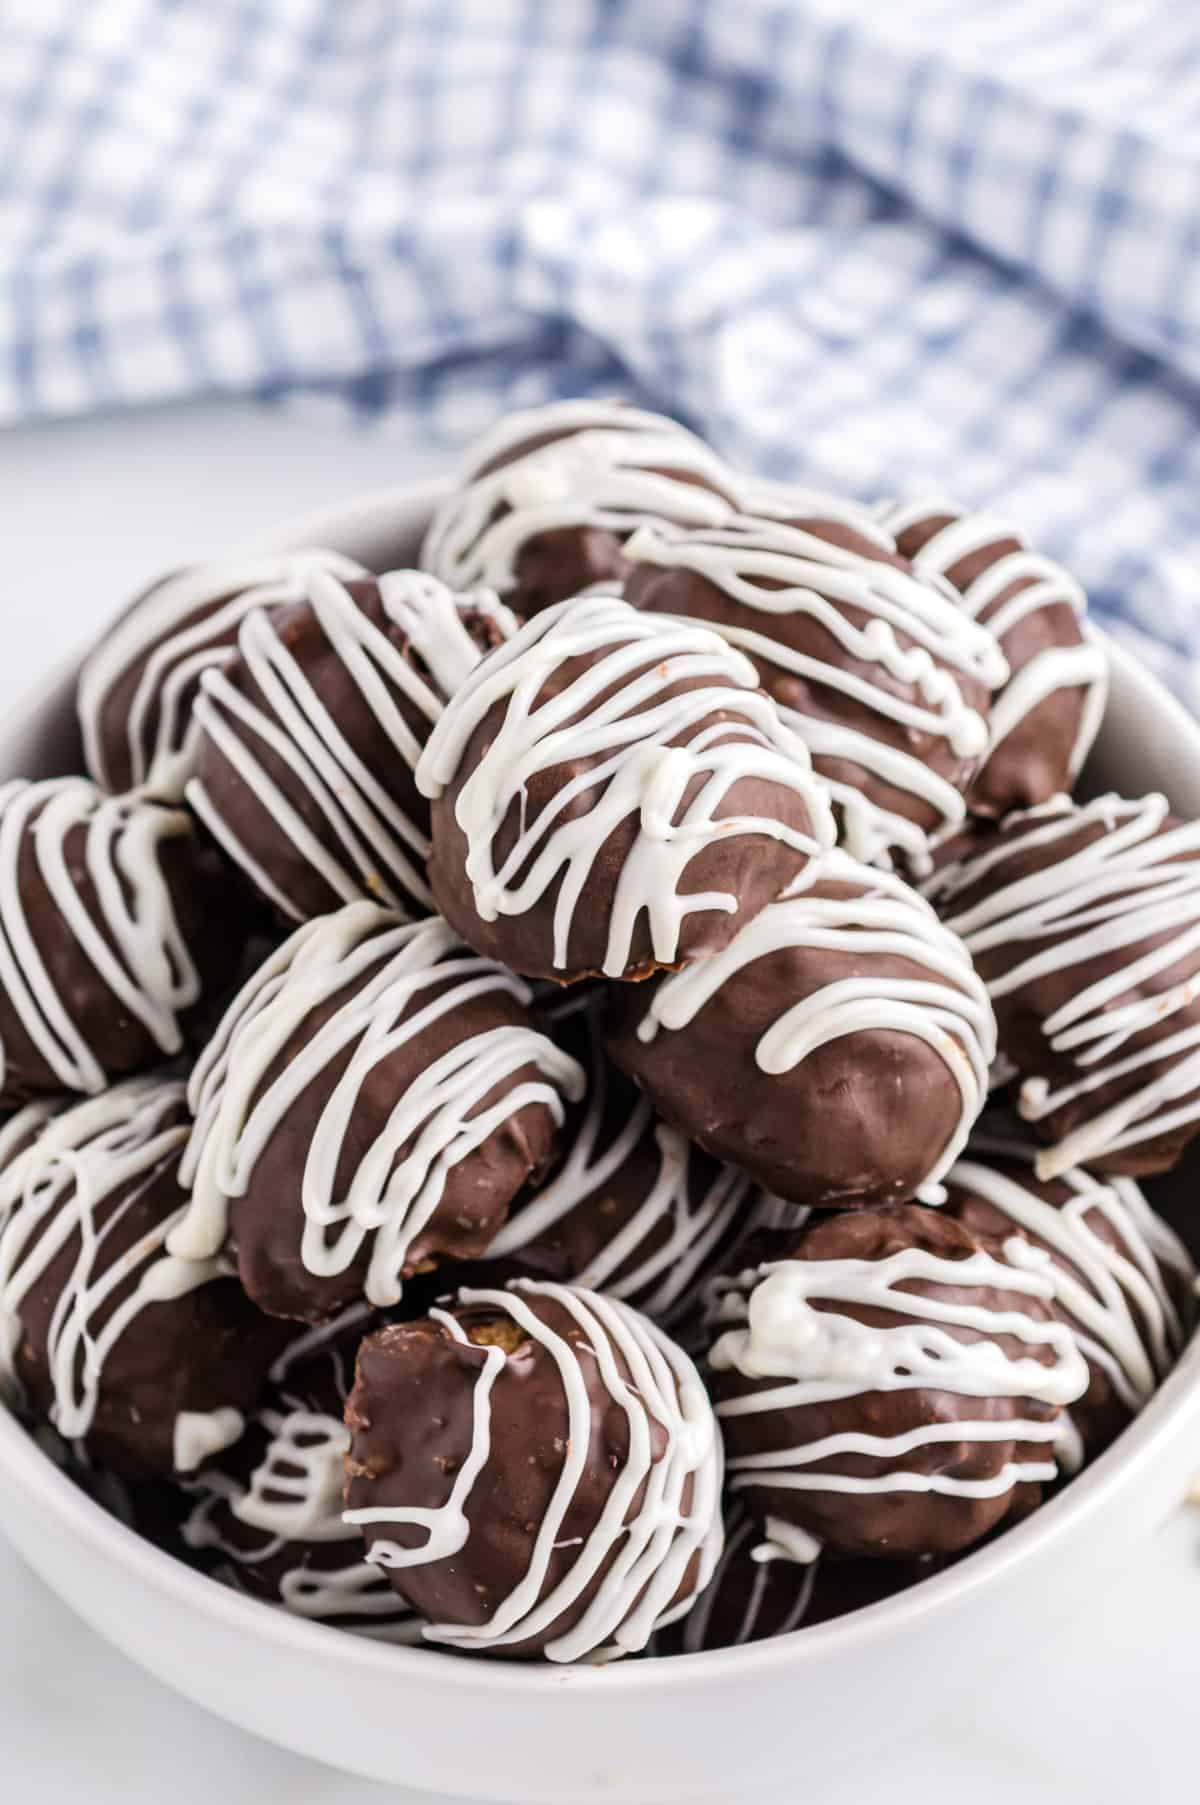 Bowl of chocolate covered rice krispies balls